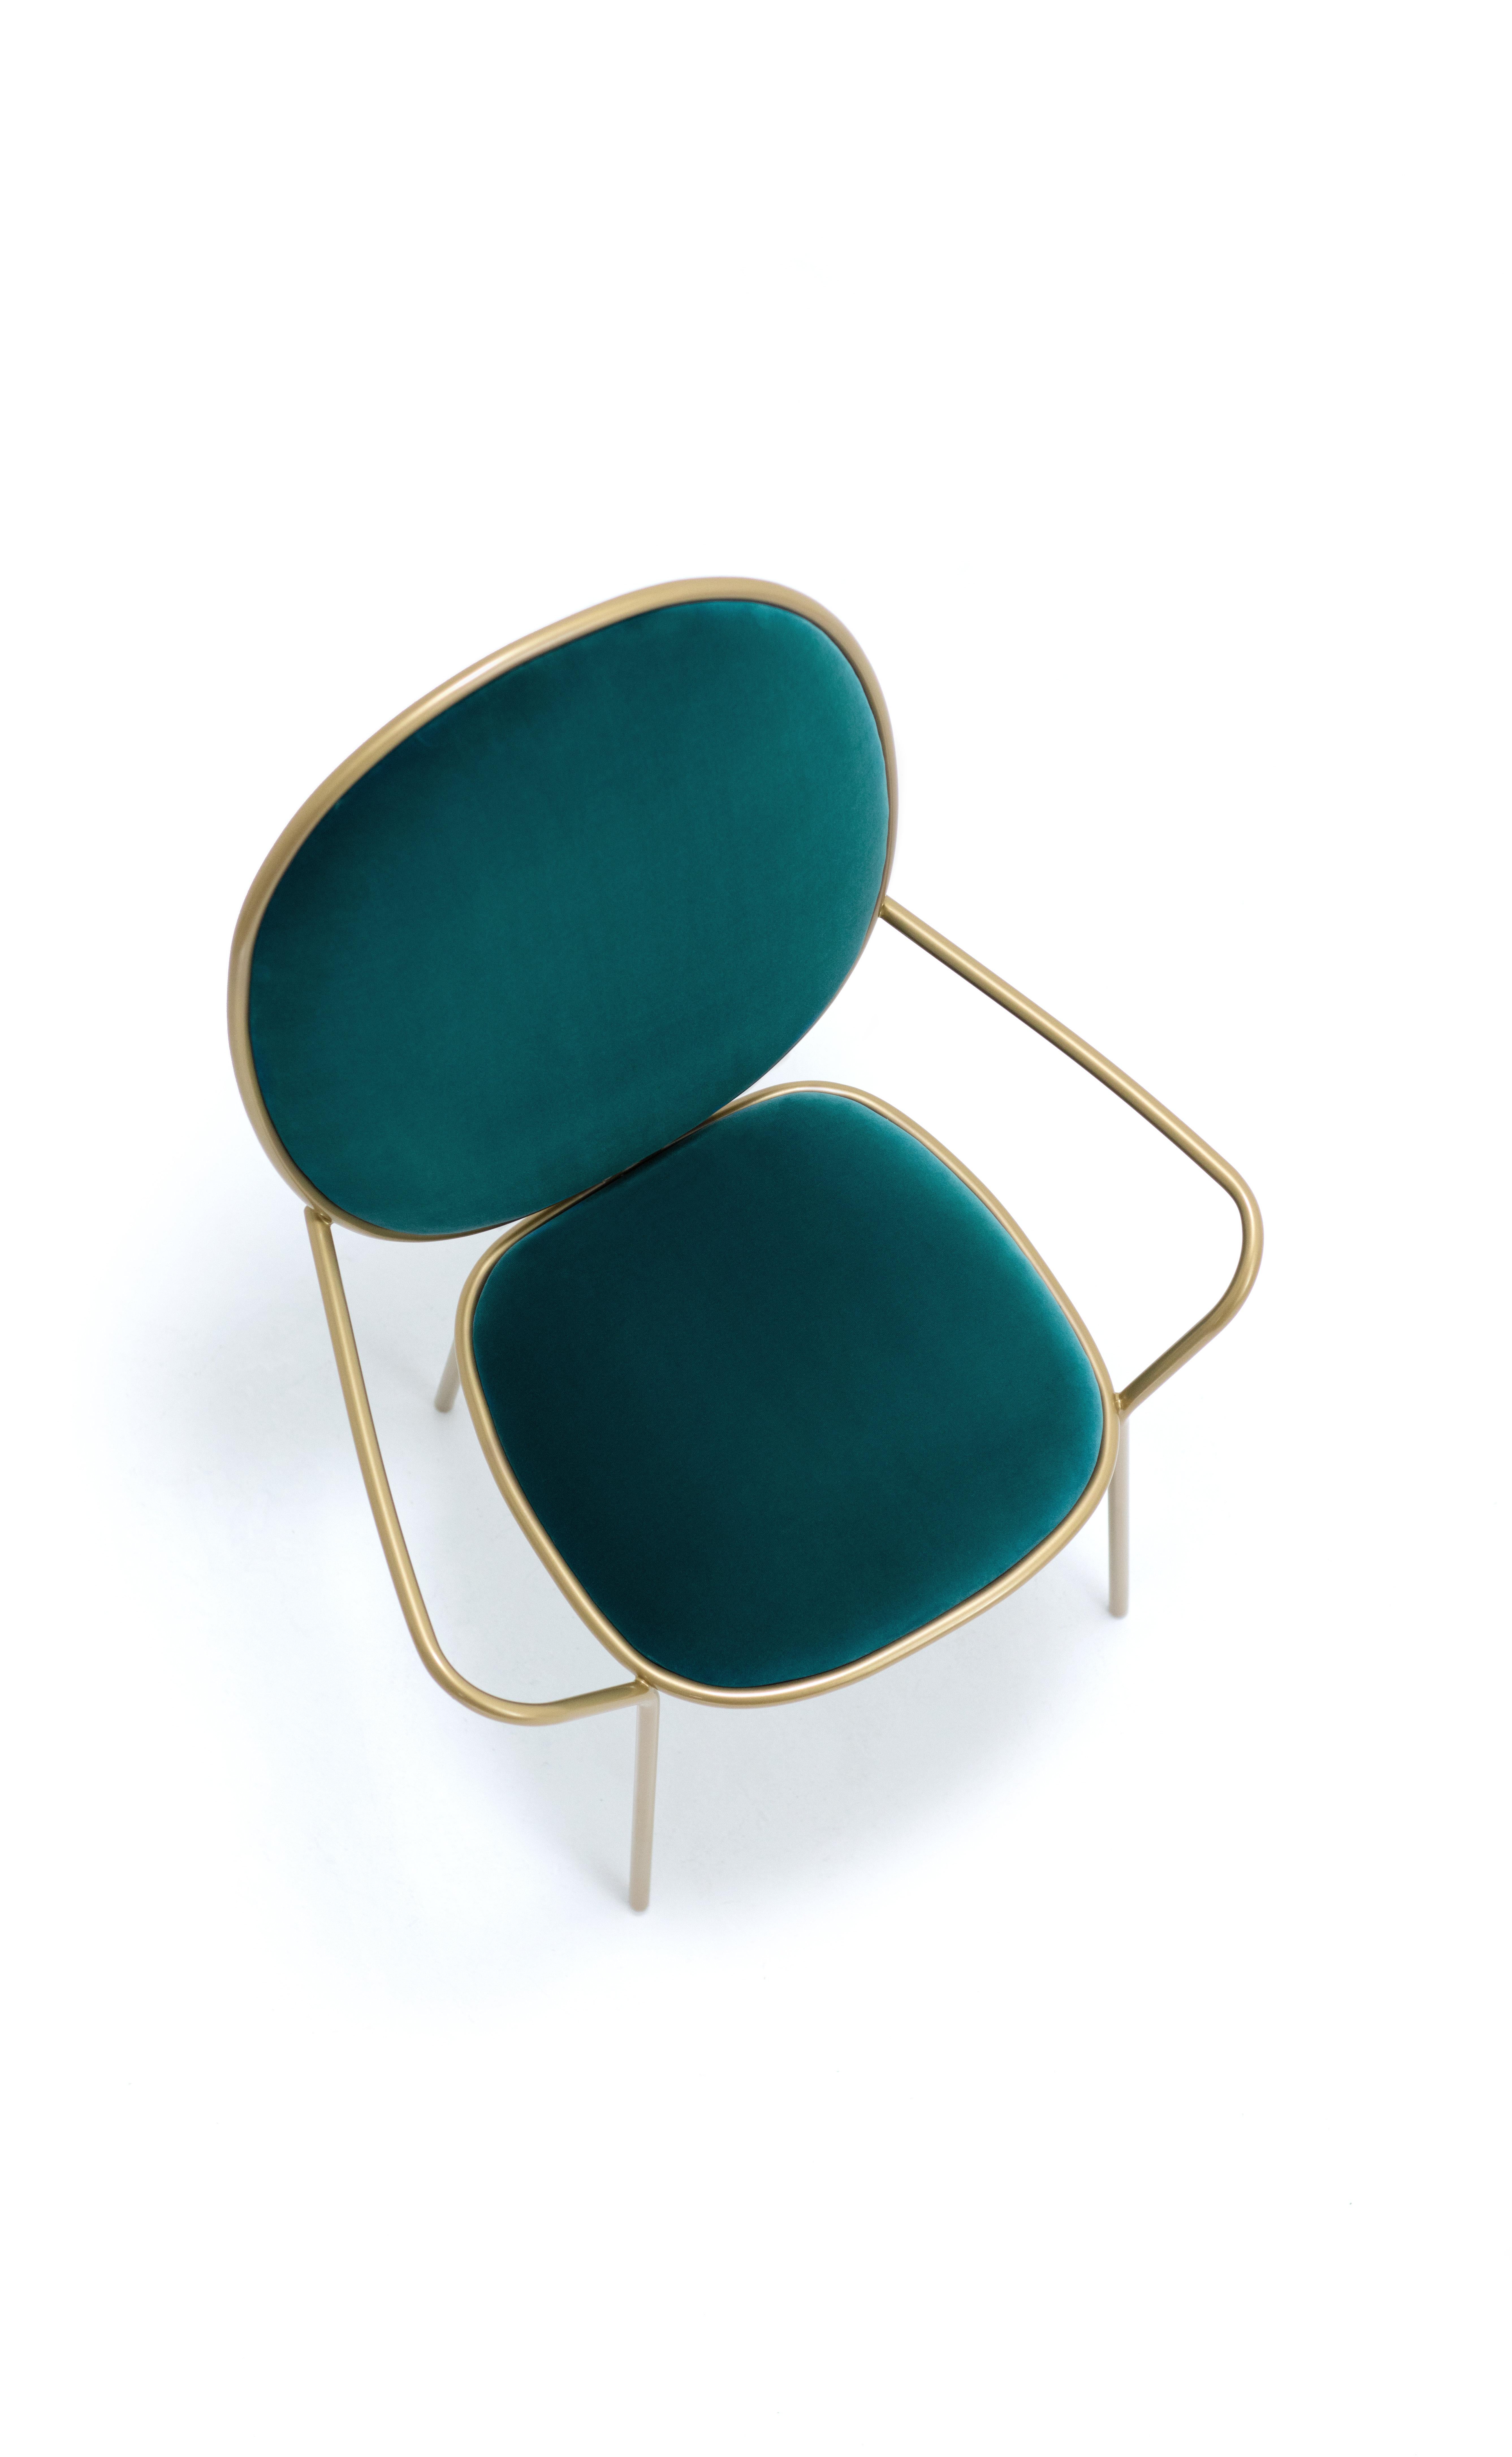 Steel Contemporary Ocean Green Velvet Upholstered Dining Armchair, Stay by Nika Zupanc For Sale